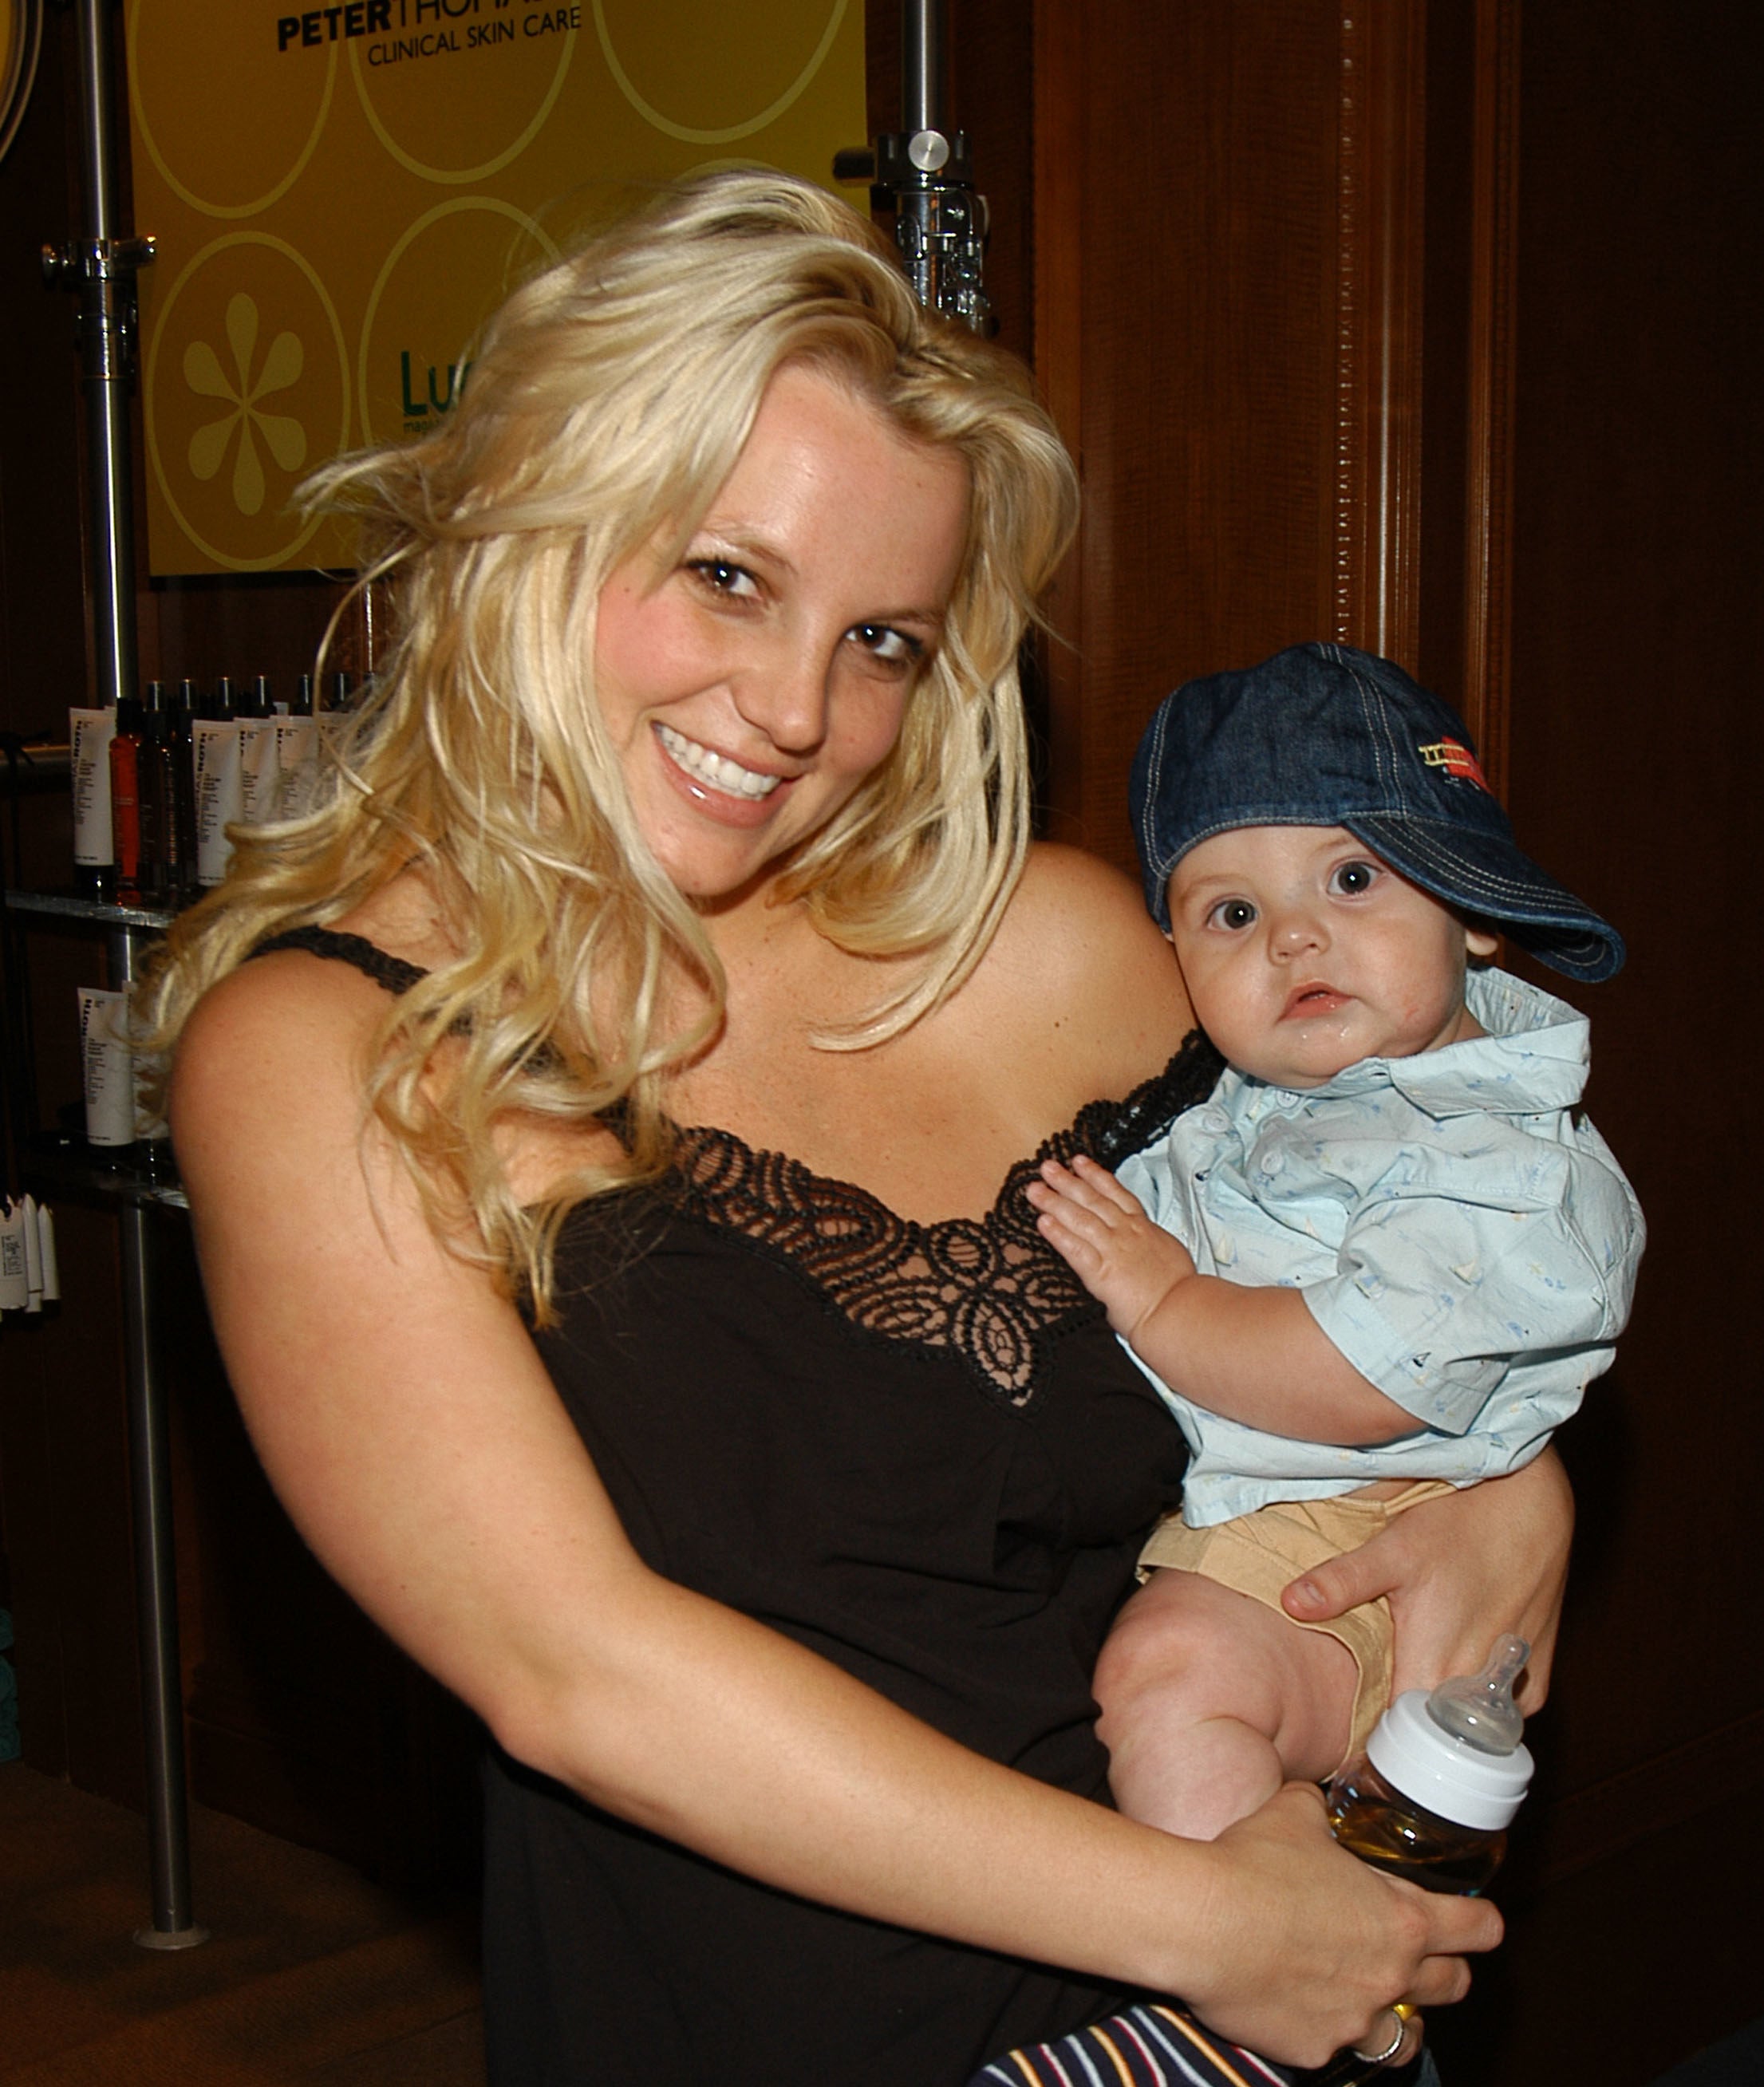 Britney holding one of her baby boys and a baby bottle